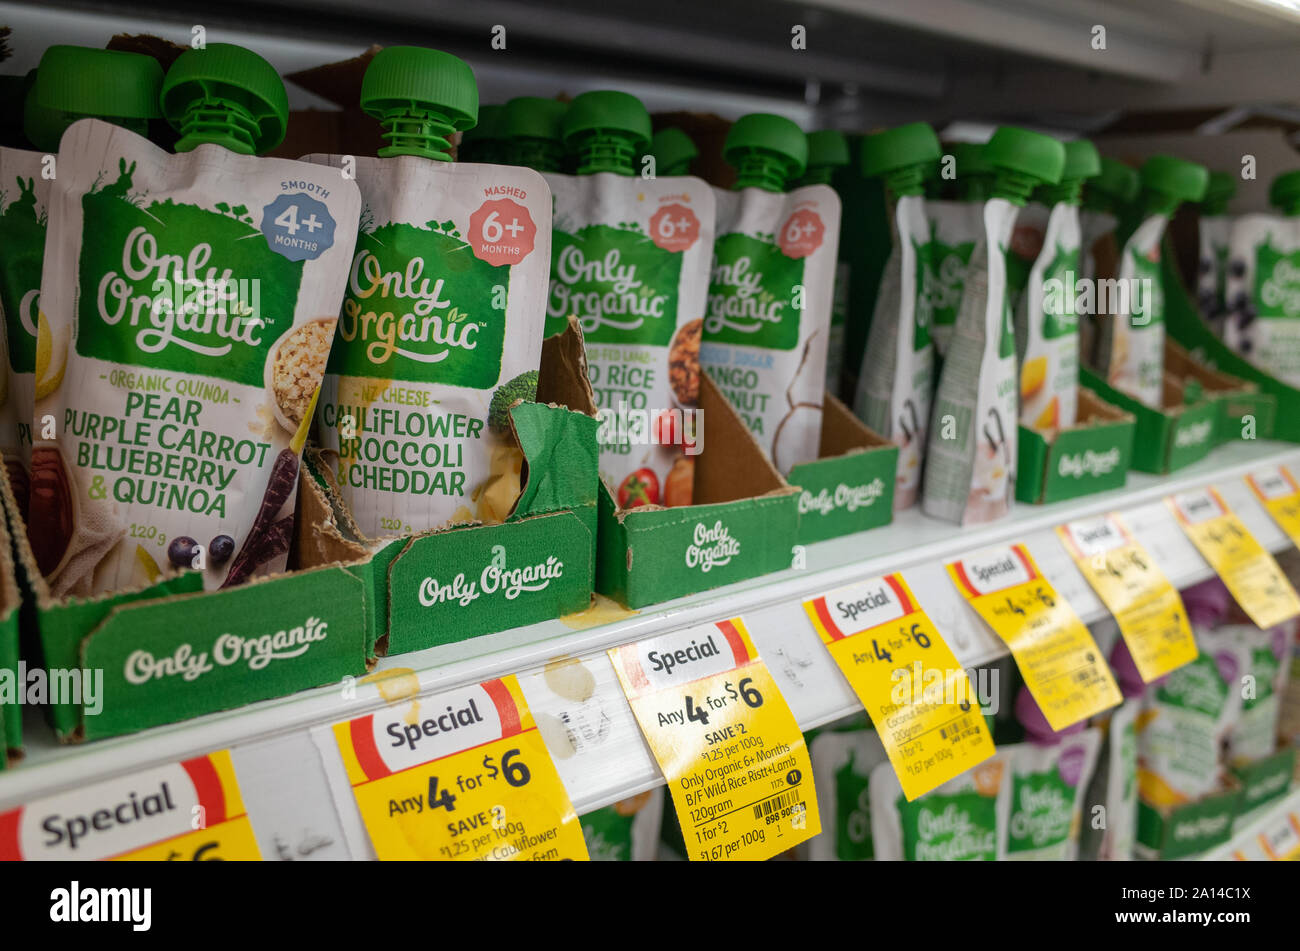 Only Organic baby food on the supermarket shelf. The brand is the first certified organic baby food range in New Zealand and Australia Stock Photo